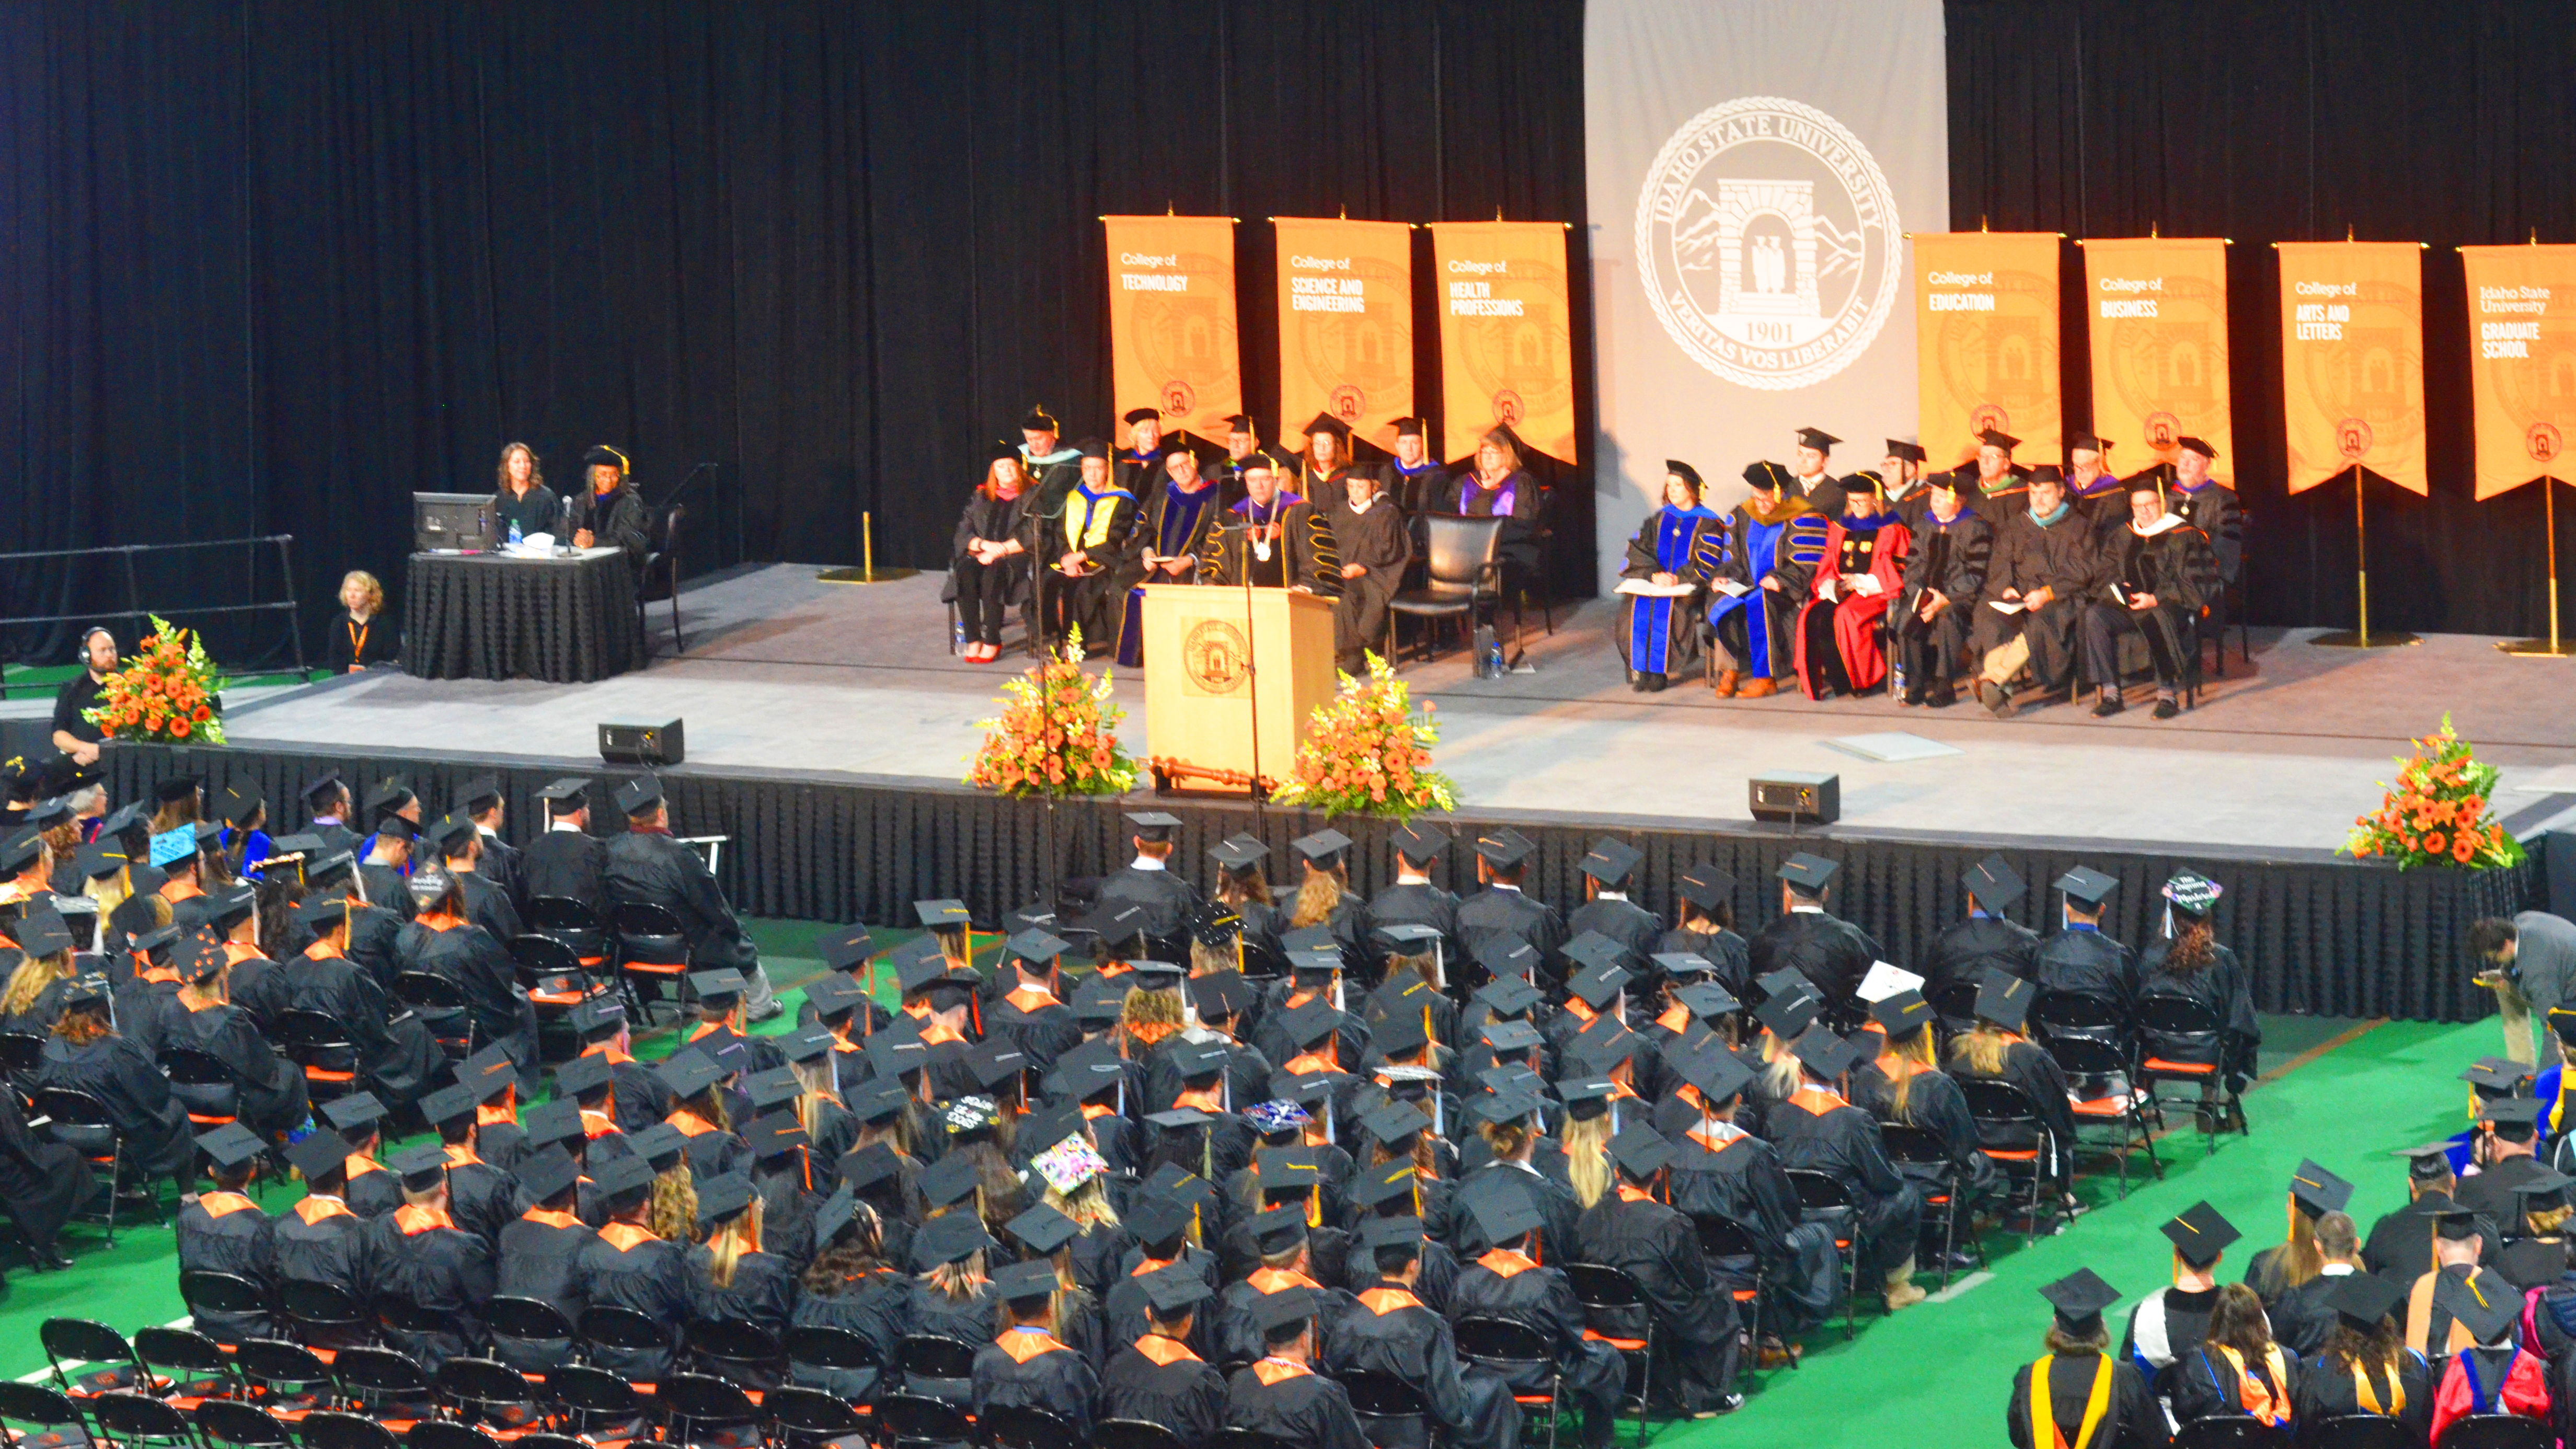 Graduates and faculty at Winter Commencement 2019